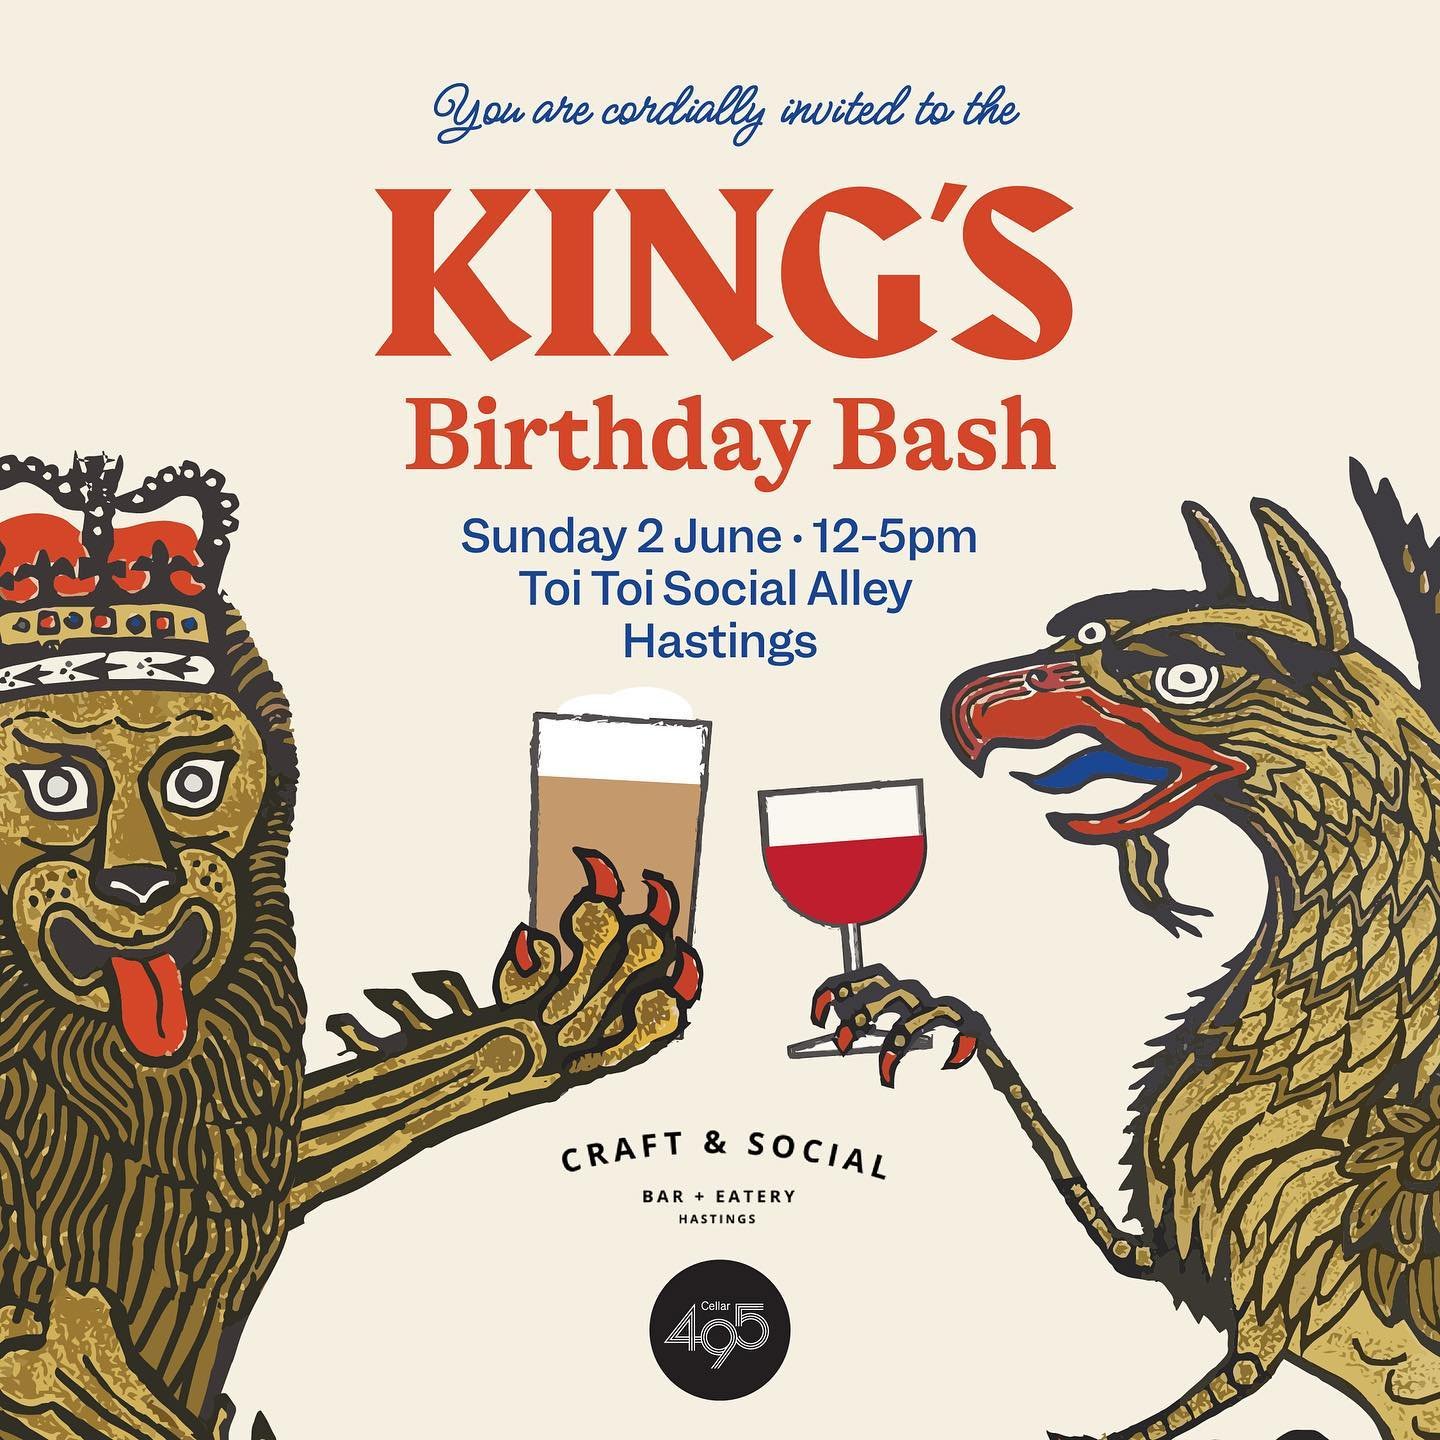 Join us with @495wines and @craftandsocialbar and other amazing local wineries for a majestic Celebration.

The King&rsquo;s Birthday Bash!

12 - 5 pm, 2nd June - Toi Toi Social Alley, Hastings. 

Get ready to raise your goblets and celebrate the day